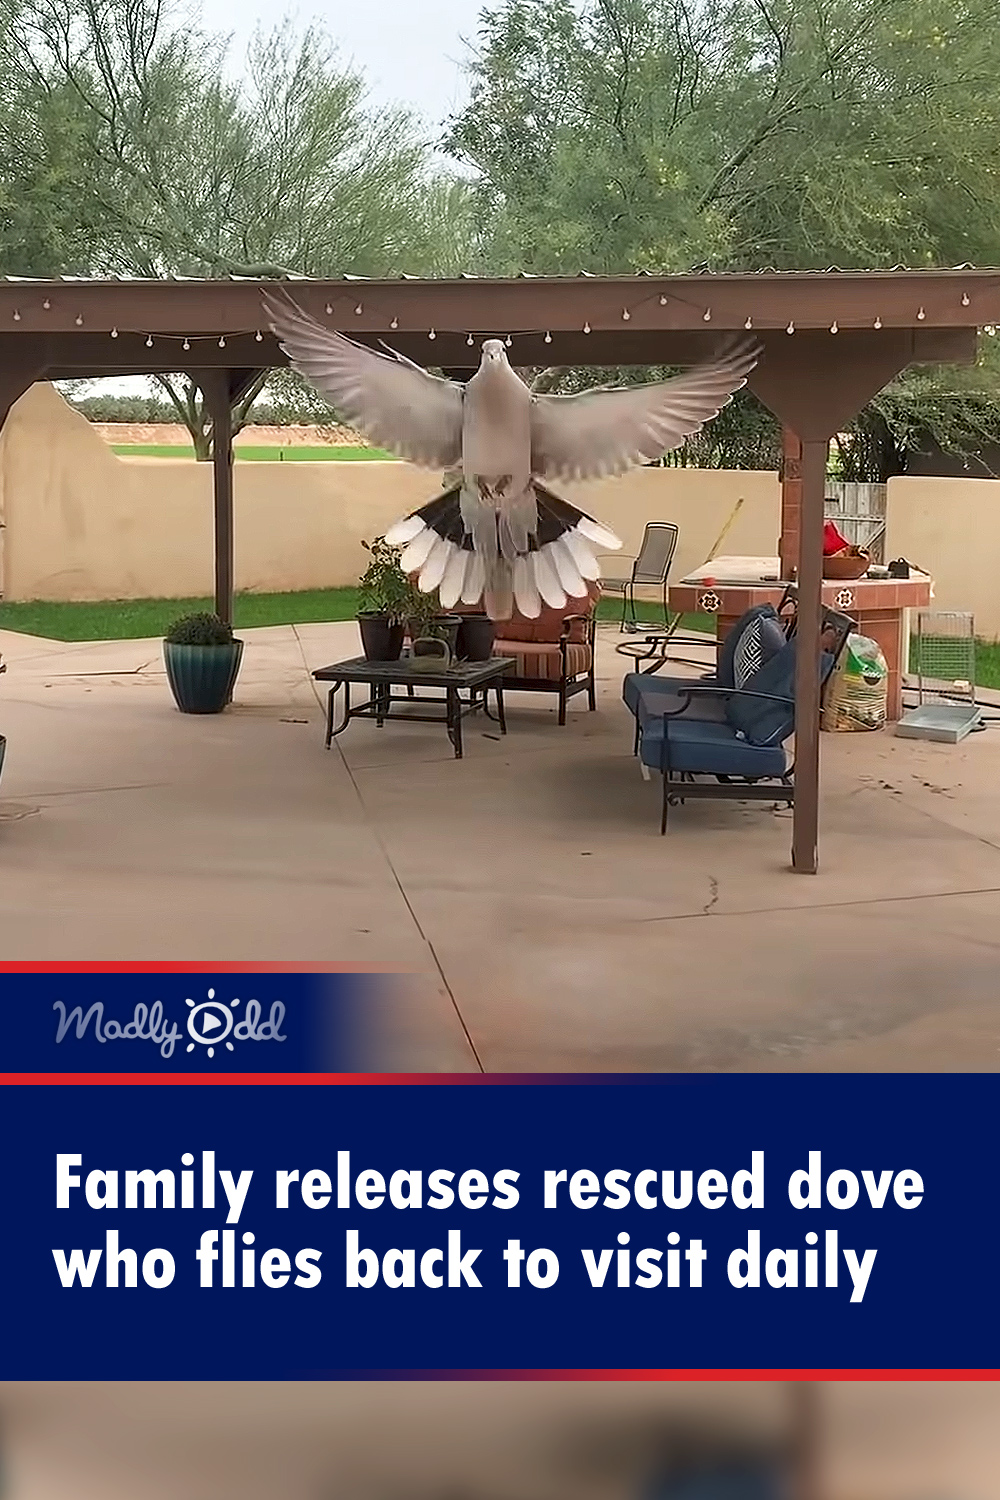 Family releases rescued dove who flies back to visit daily